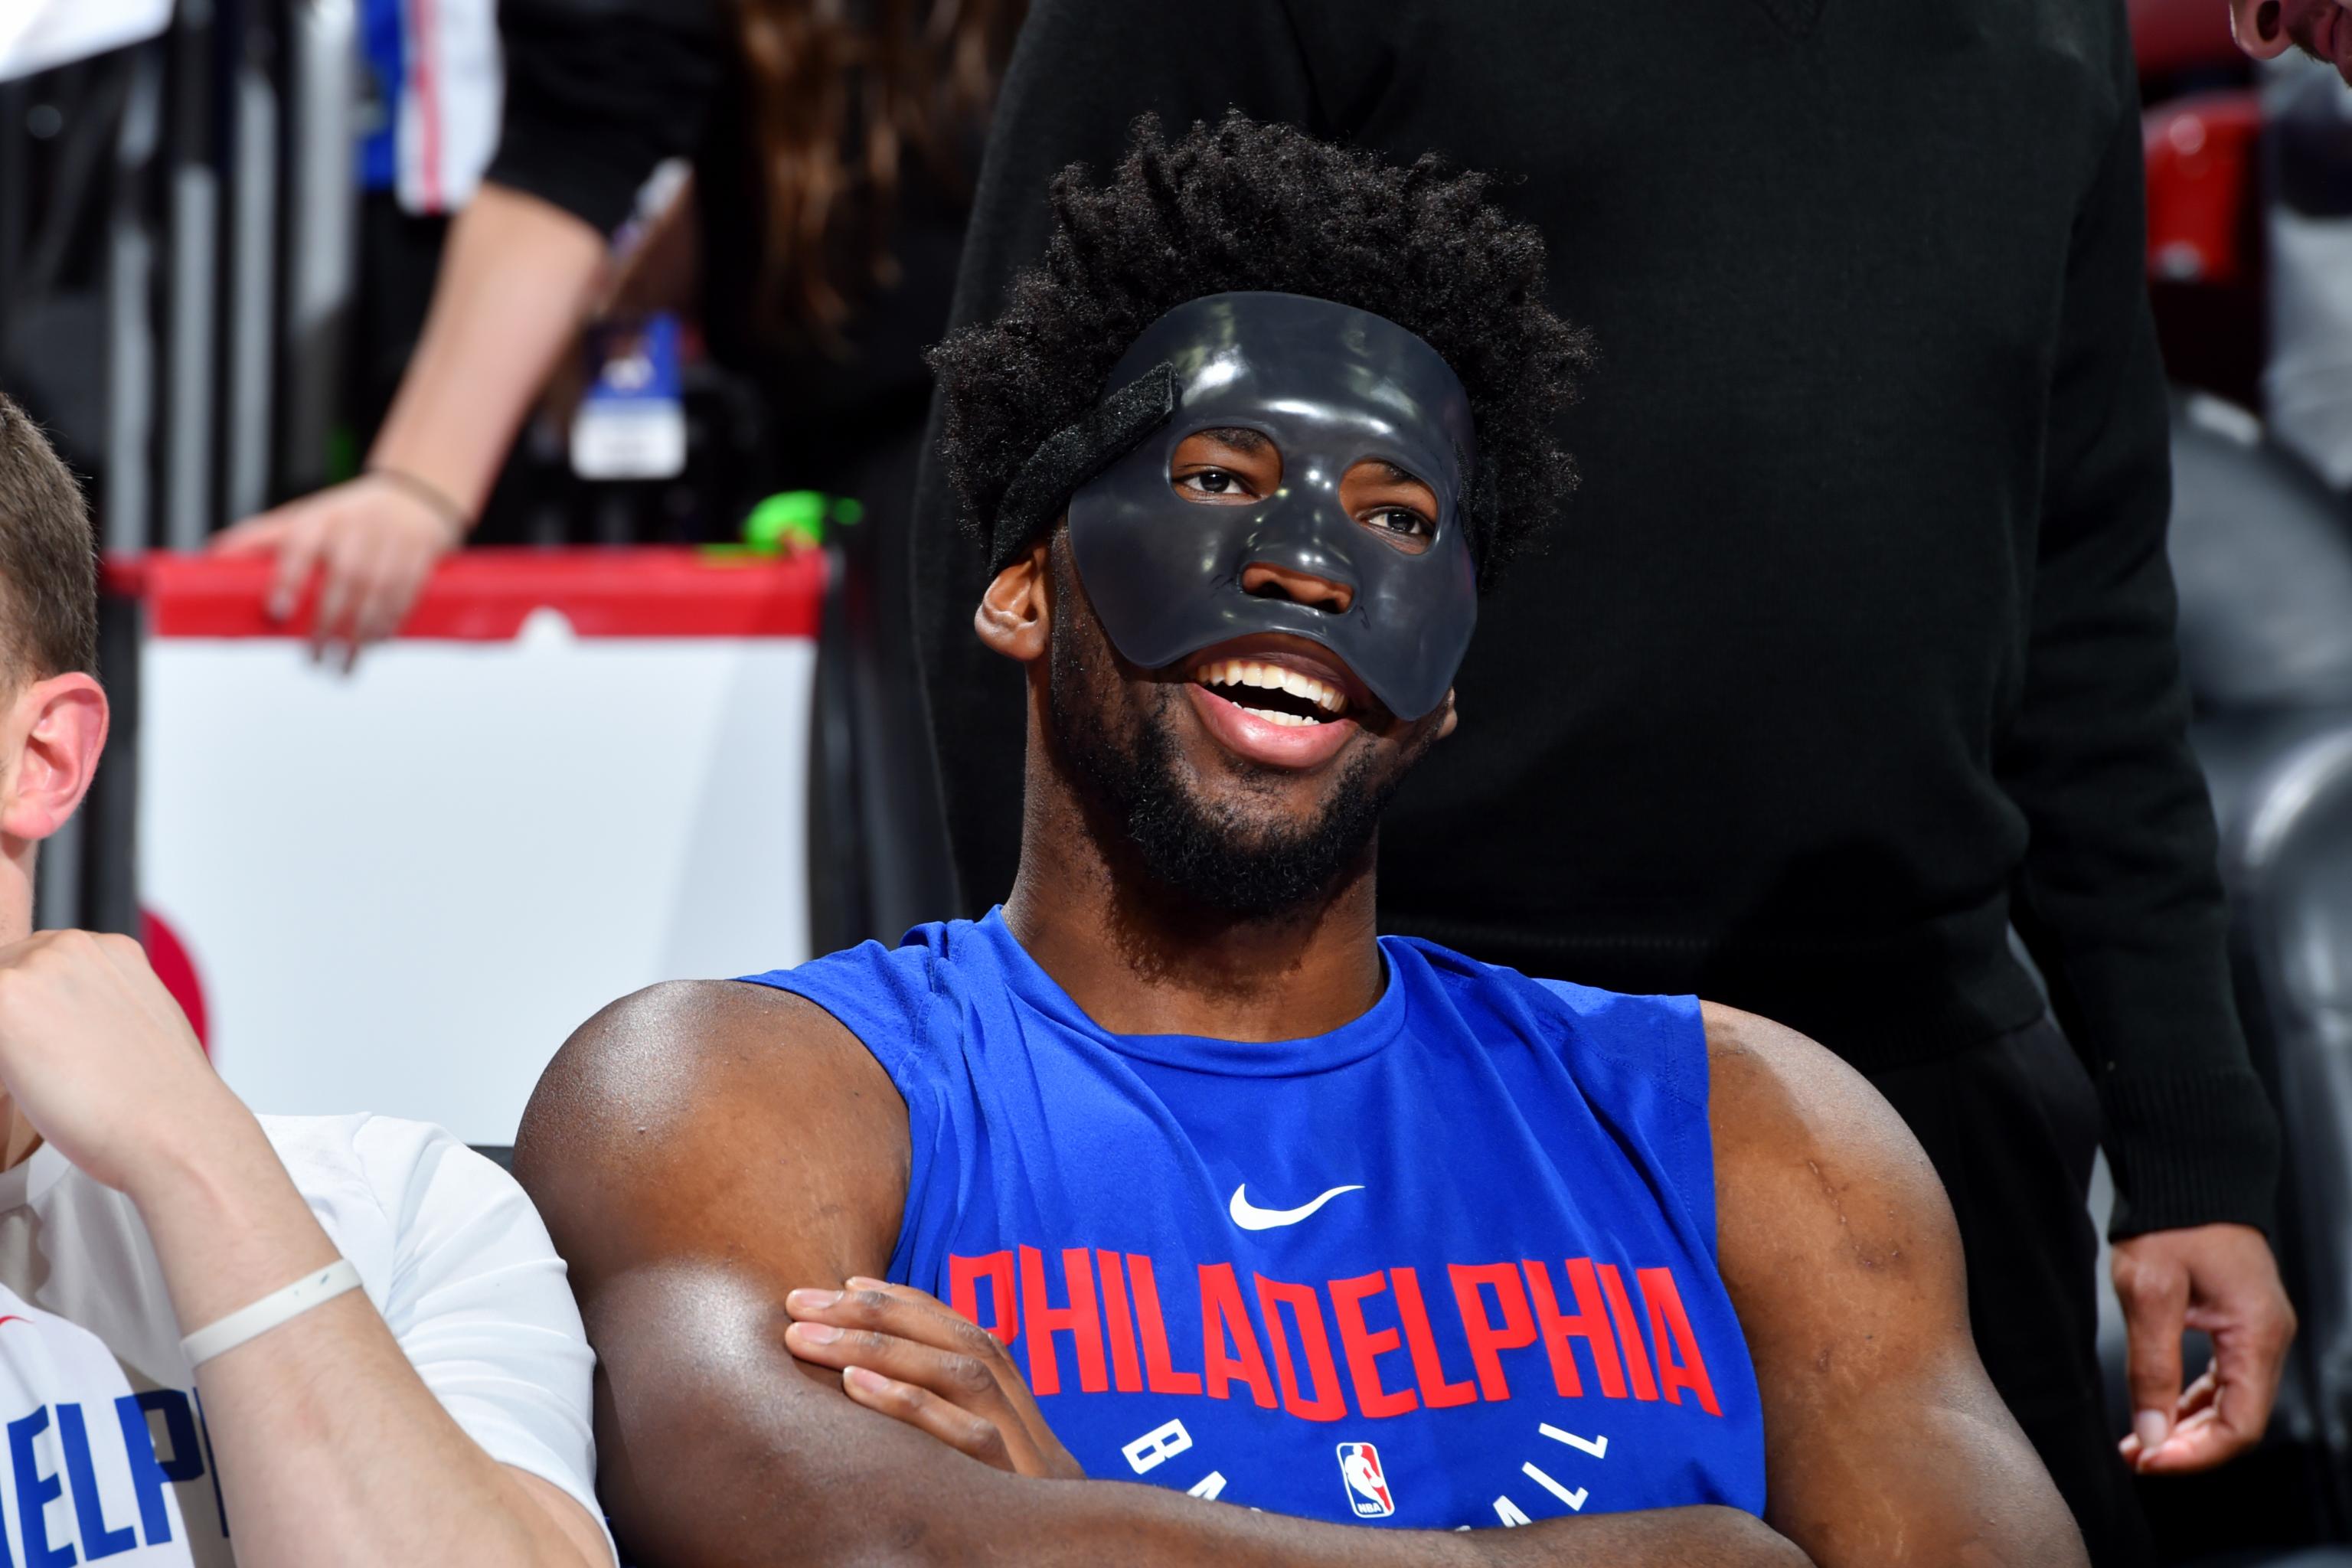 Joel Embiid Calls Himself The Phantom Of The Process In New Mask